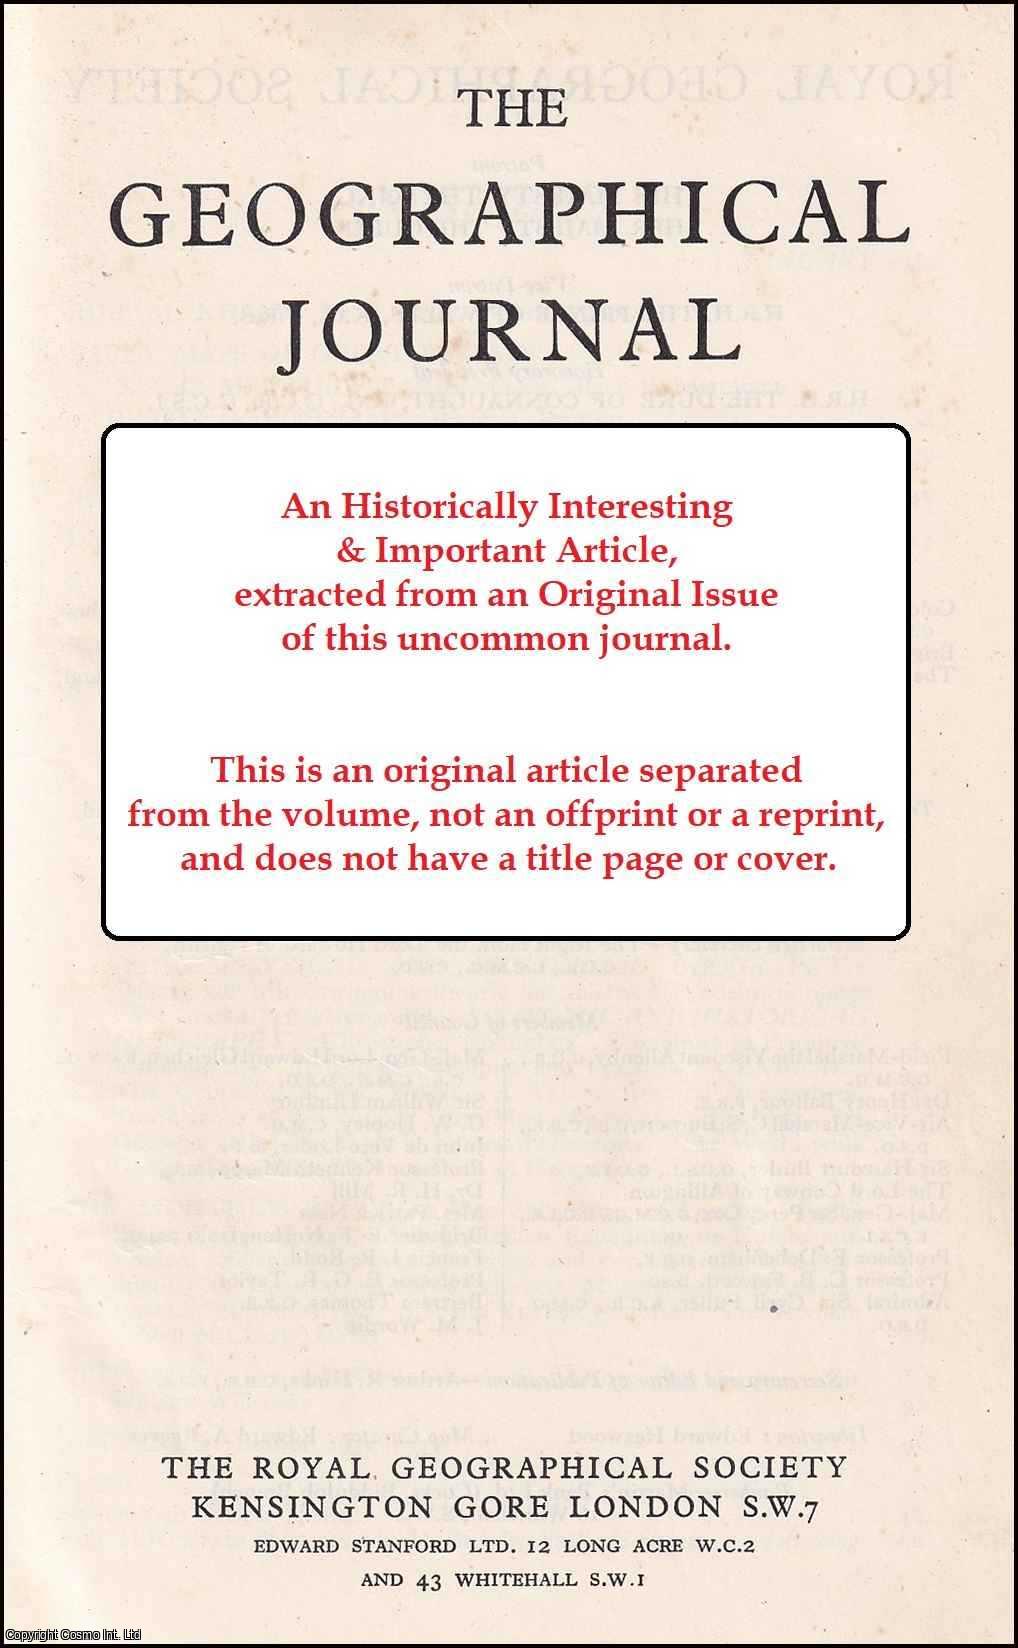 N. J. Graves - Geography, Social Science and Inter-Disciplinary Enquiry. An original article from the Geographical Journal, 1968.